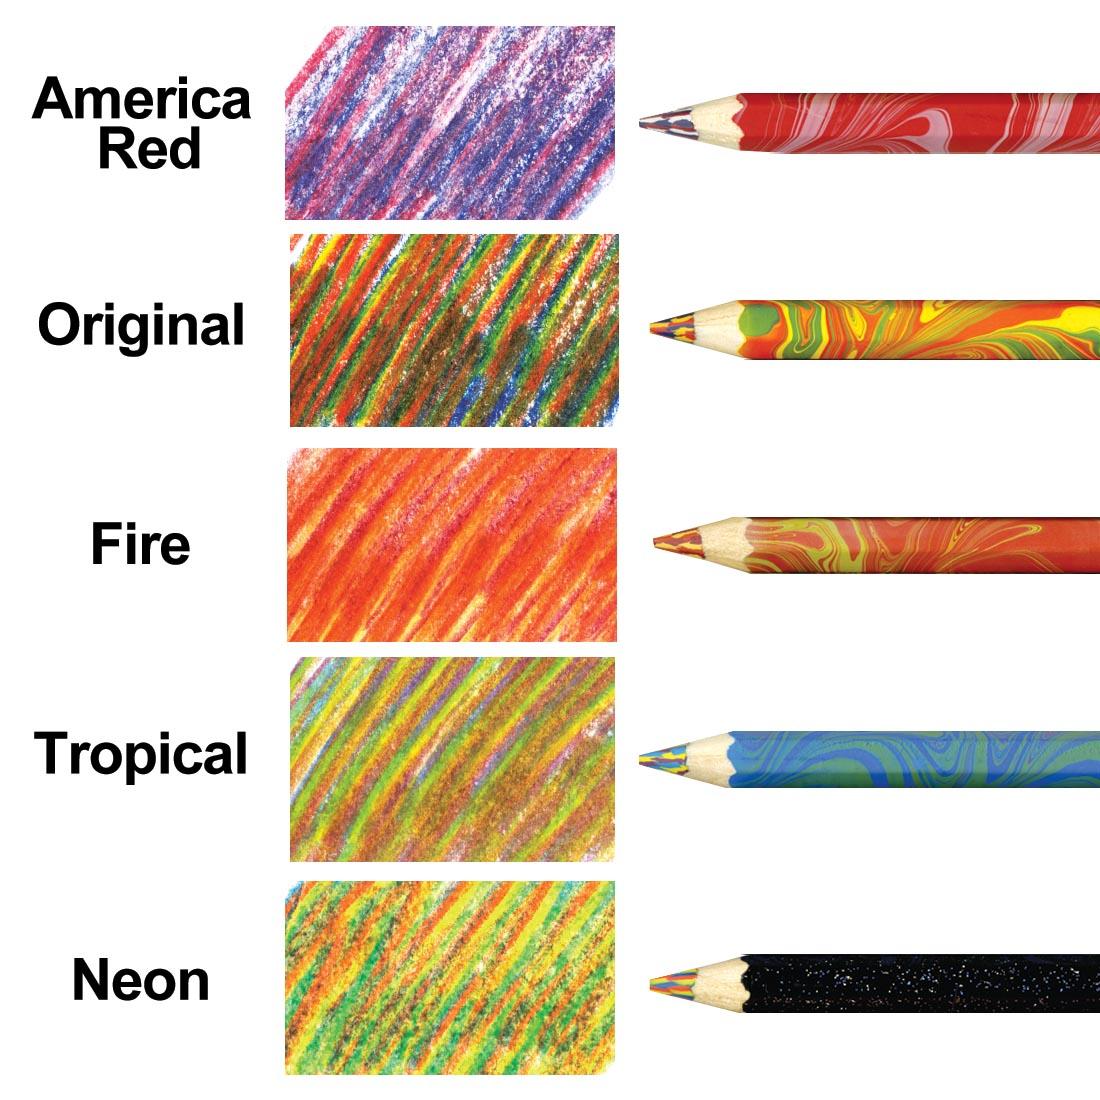 Koh-I-Noor Magic FX Pencils 5-Count Set coloring samples of America Red, Original, Fire, Tropical and Neon